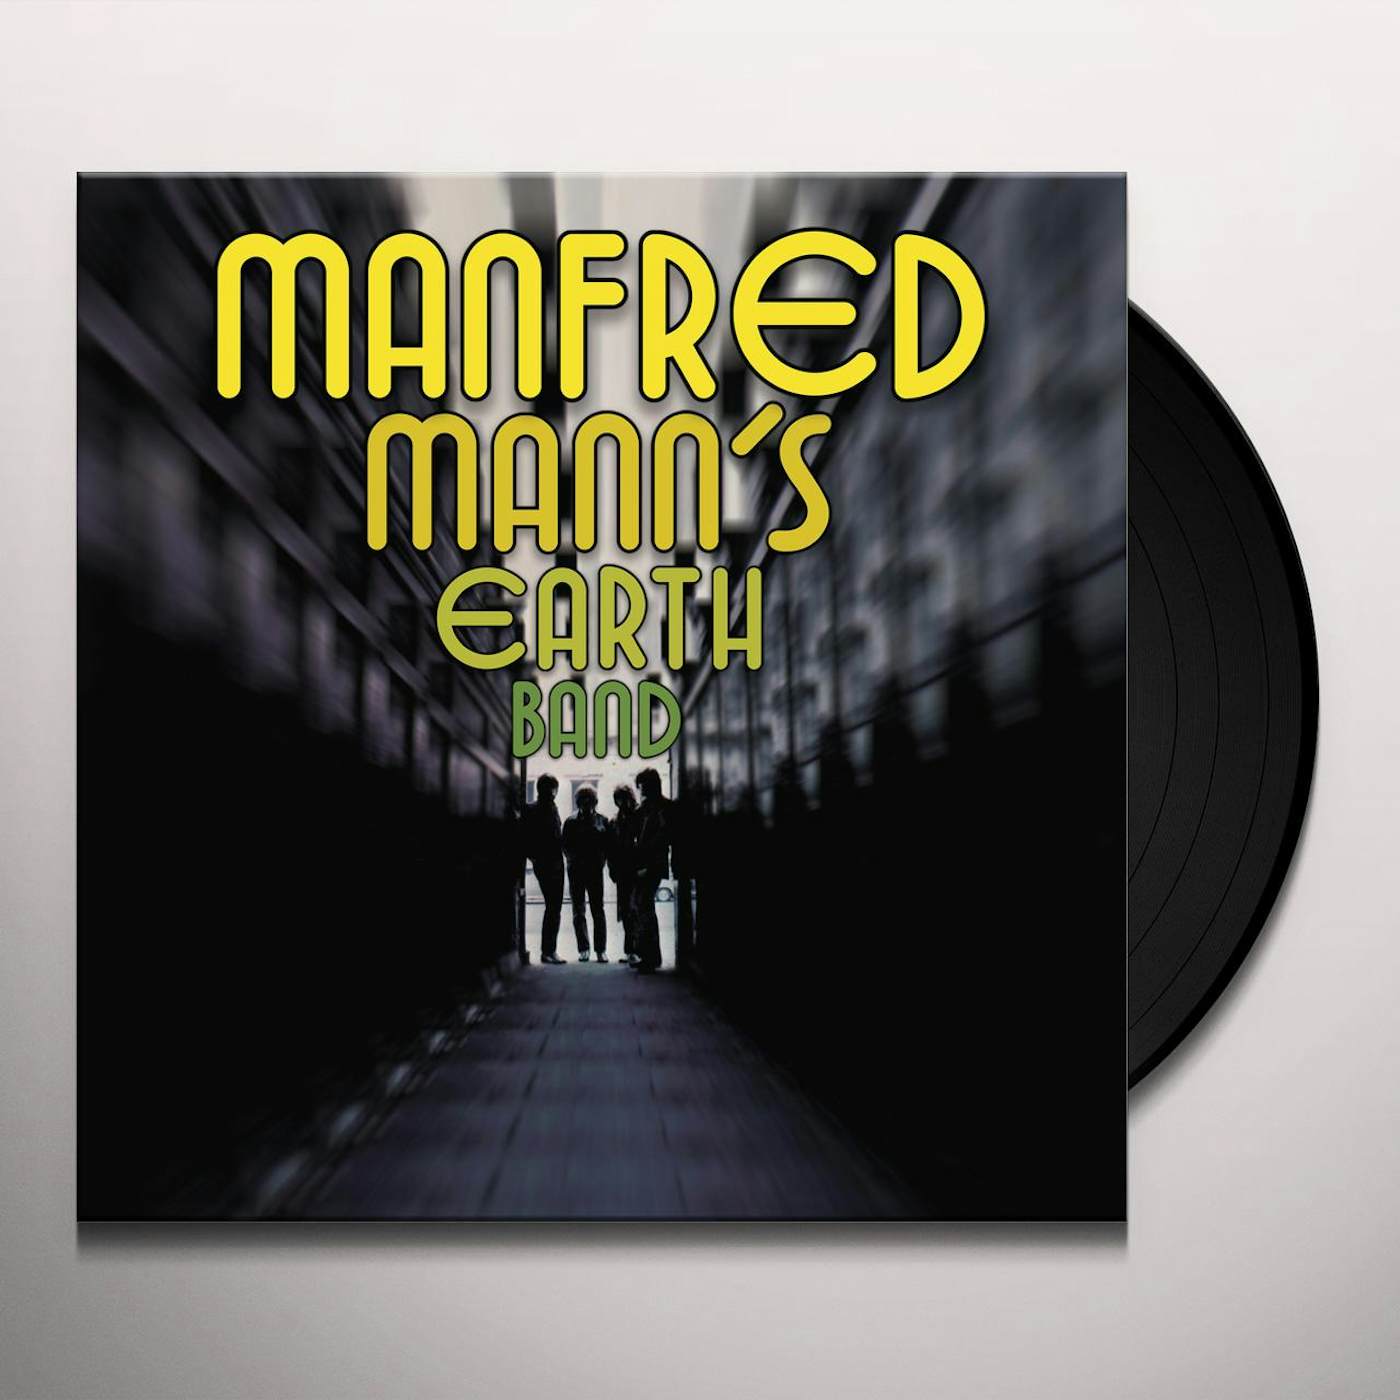 Manfred Mann's Earth Band Vinyl Record